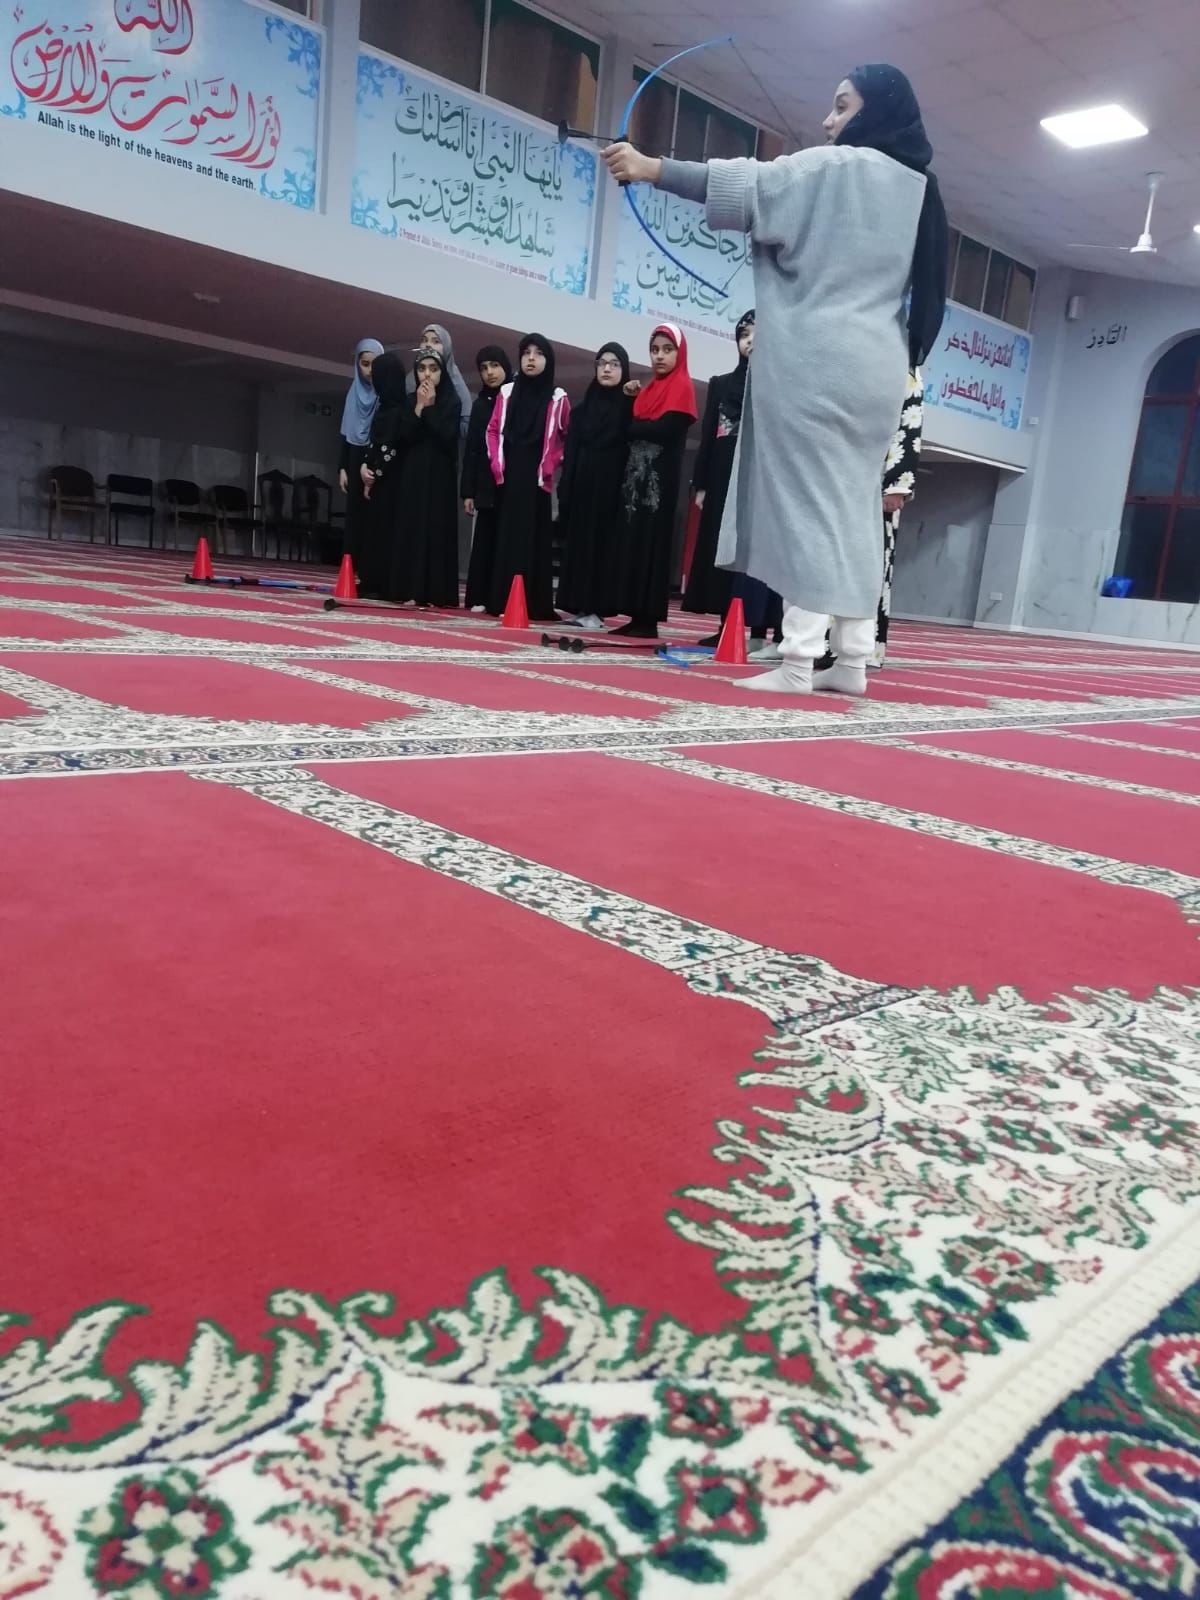 Girls and women trying archery in the mosque